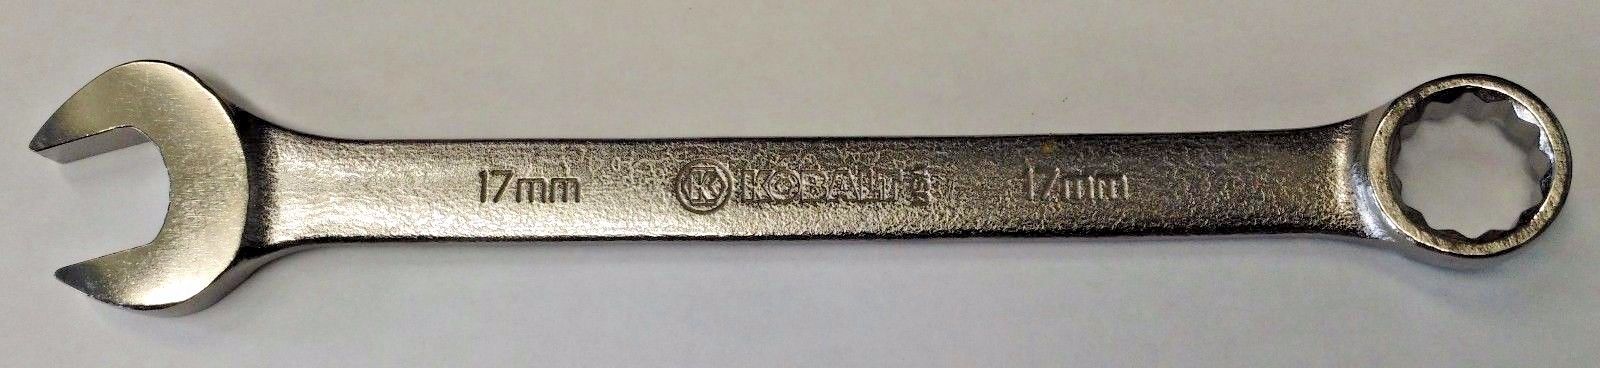 Kobalt 22917 17mm 12 Point Combination Wrench USA